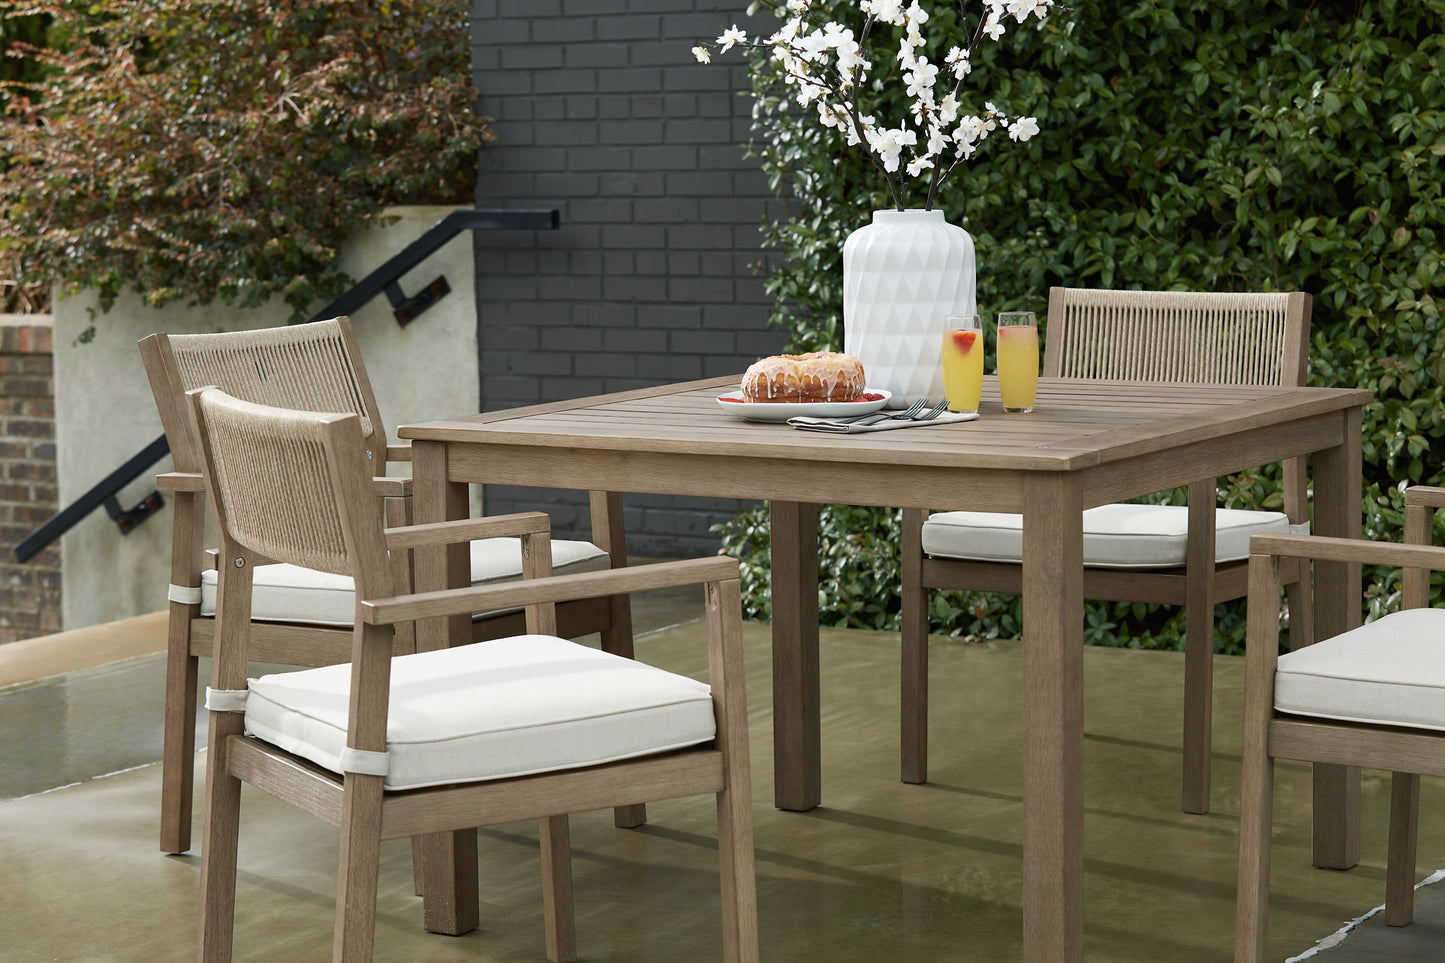 Aria Plains Outdoor Dining Table and 4 Chairs Wilson Furniture (OH)  in Bridgeport, Ohio. Serving Bridgeport, Yorkville, Bellaire, & Avondale